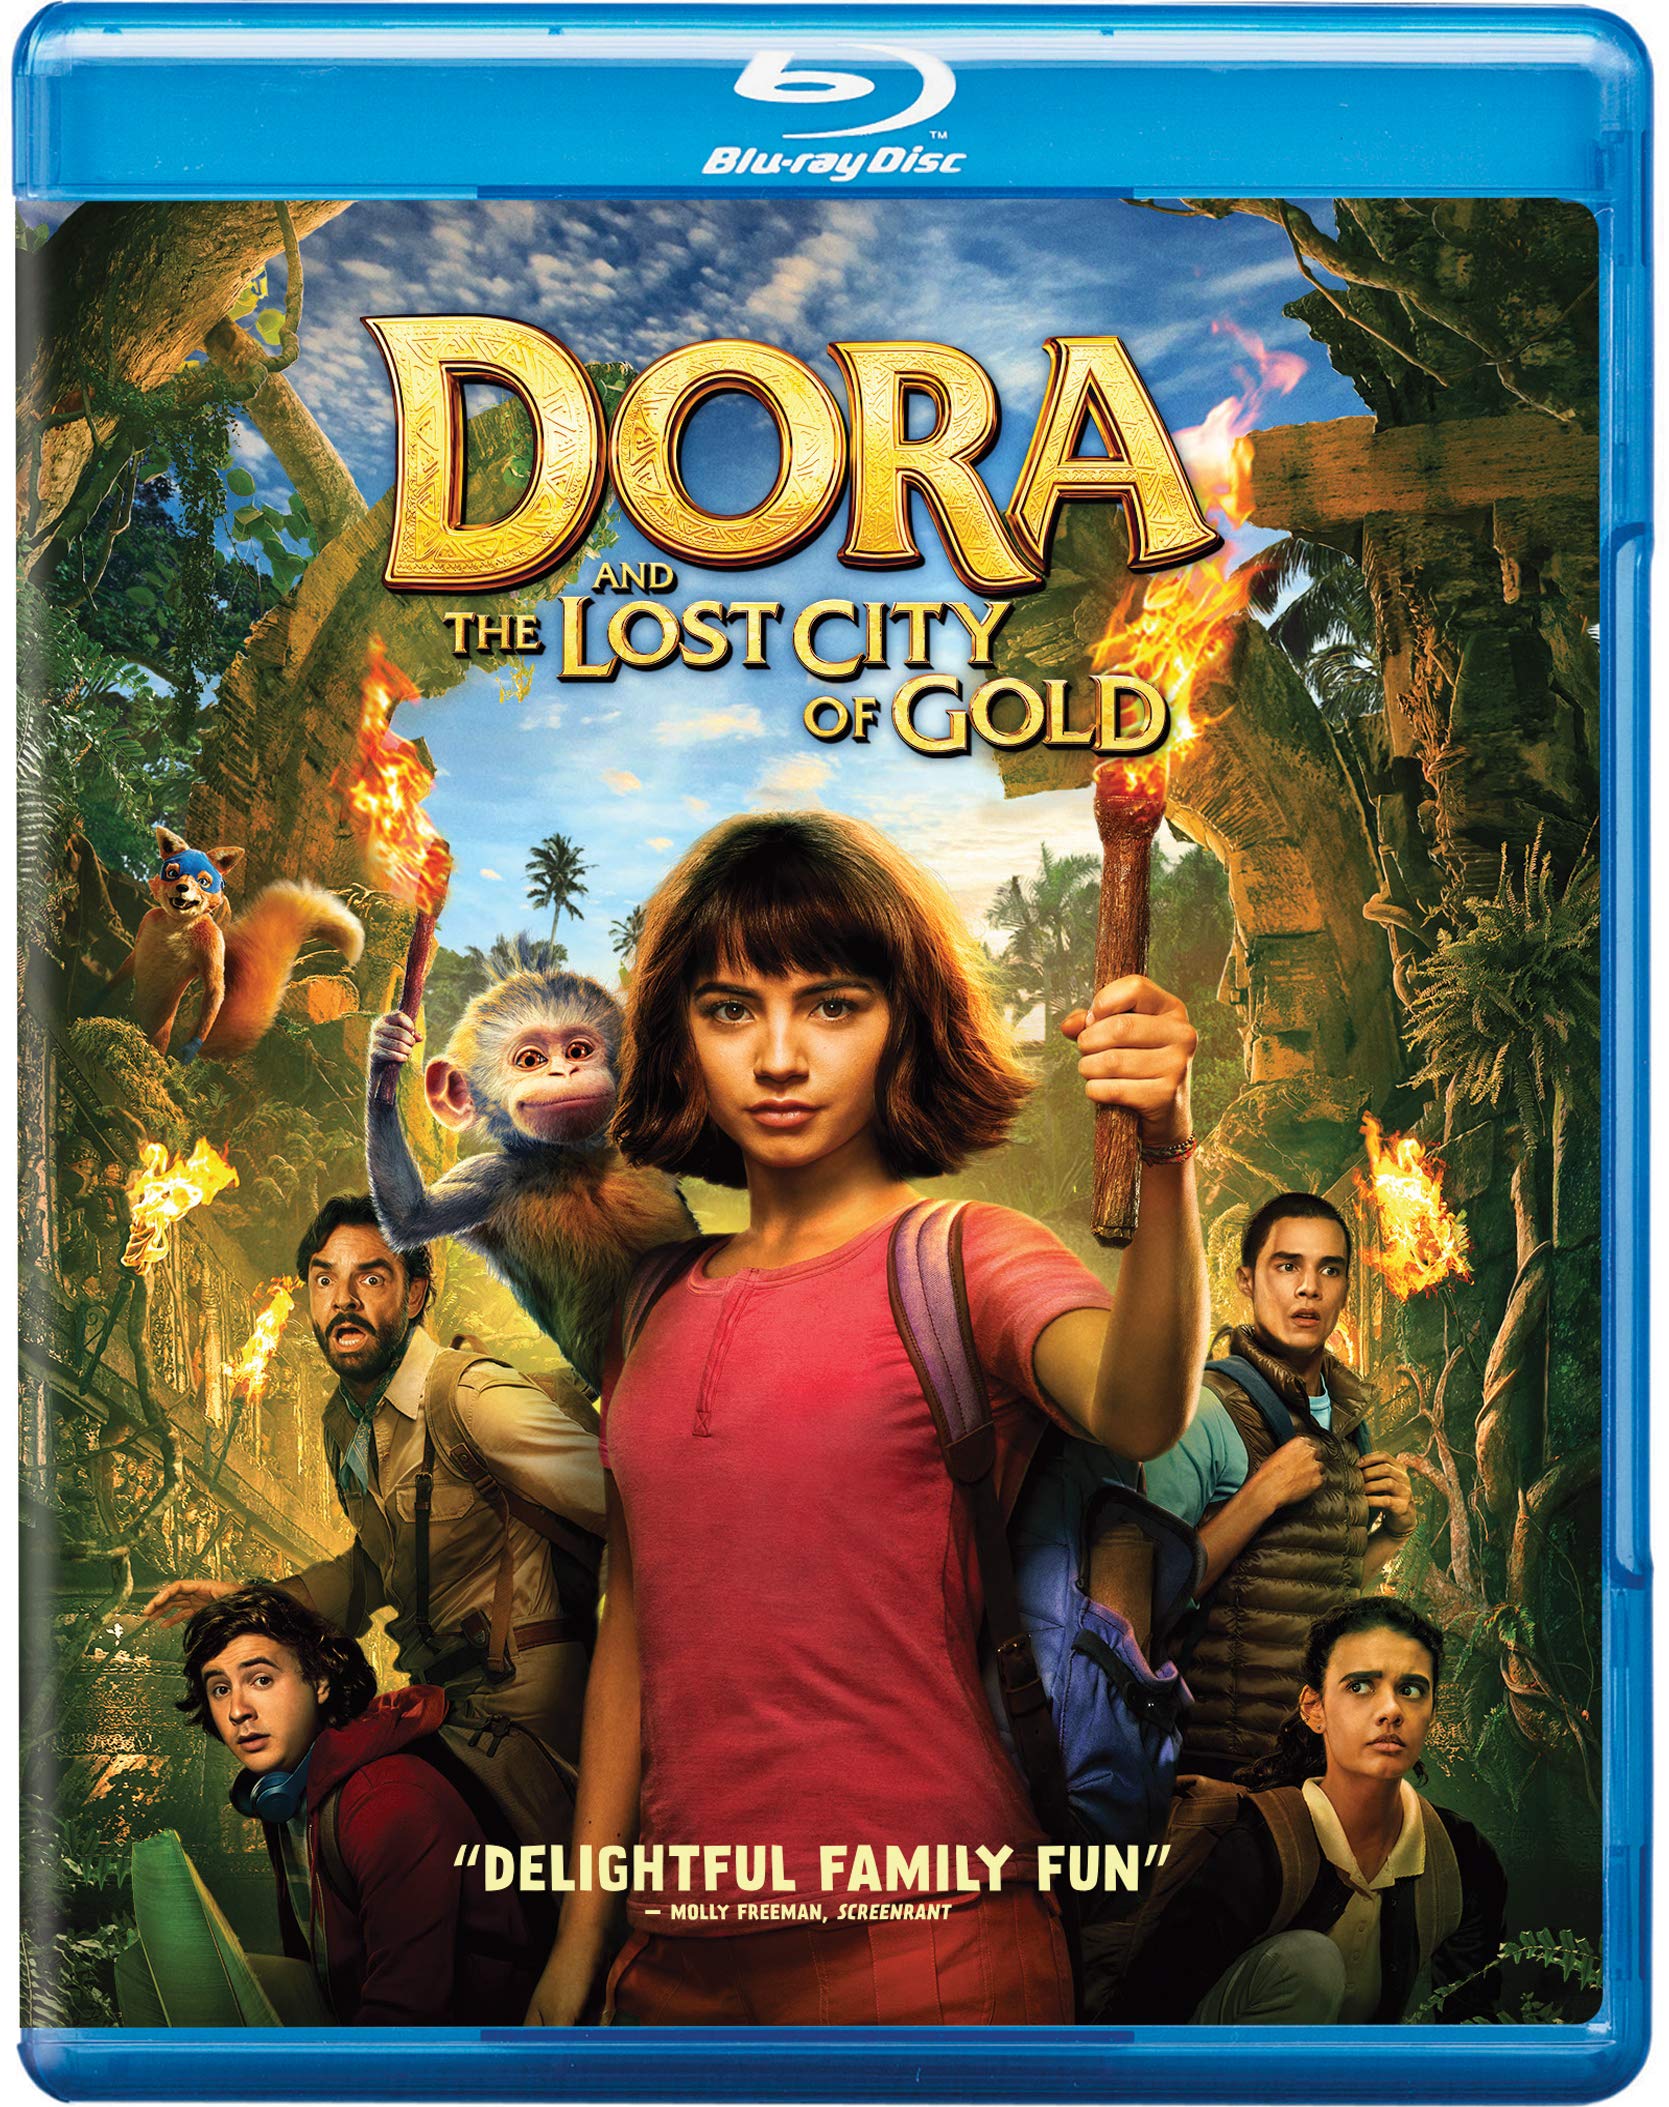 dora-and-the-lost-city-of-gold-movie-purchase-or-watch-online